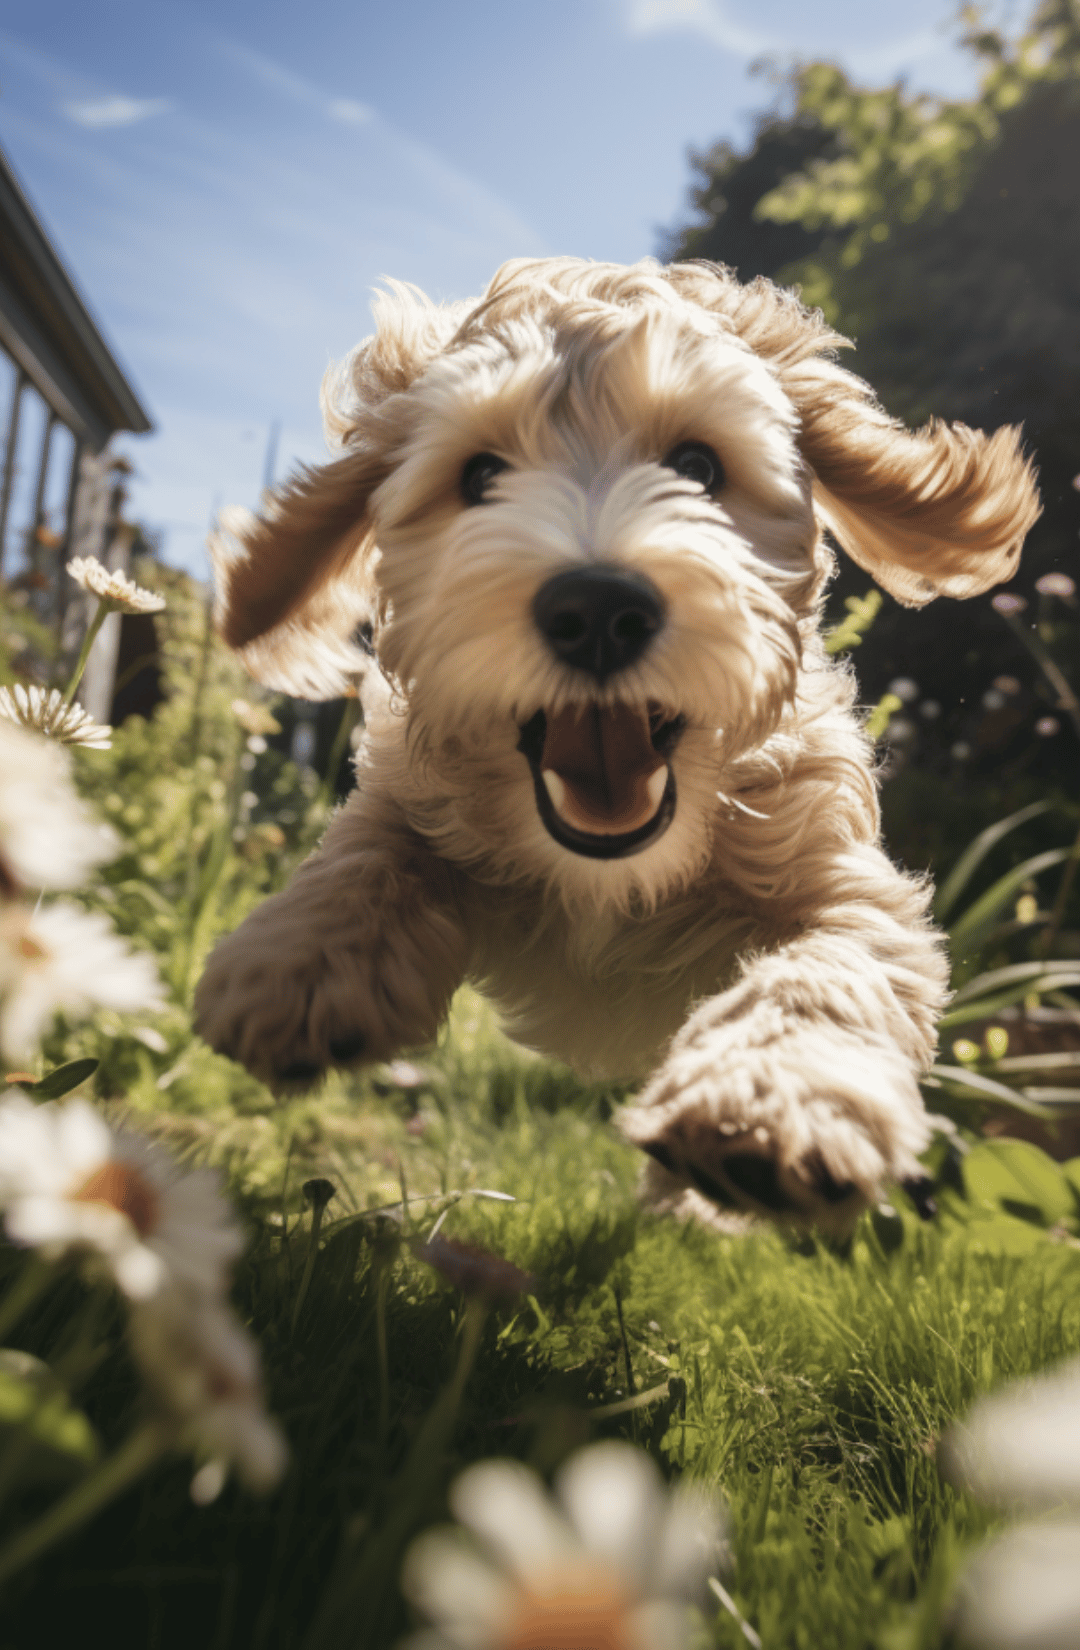 Photo of a a happy dog jumping and smiling midair - Knose